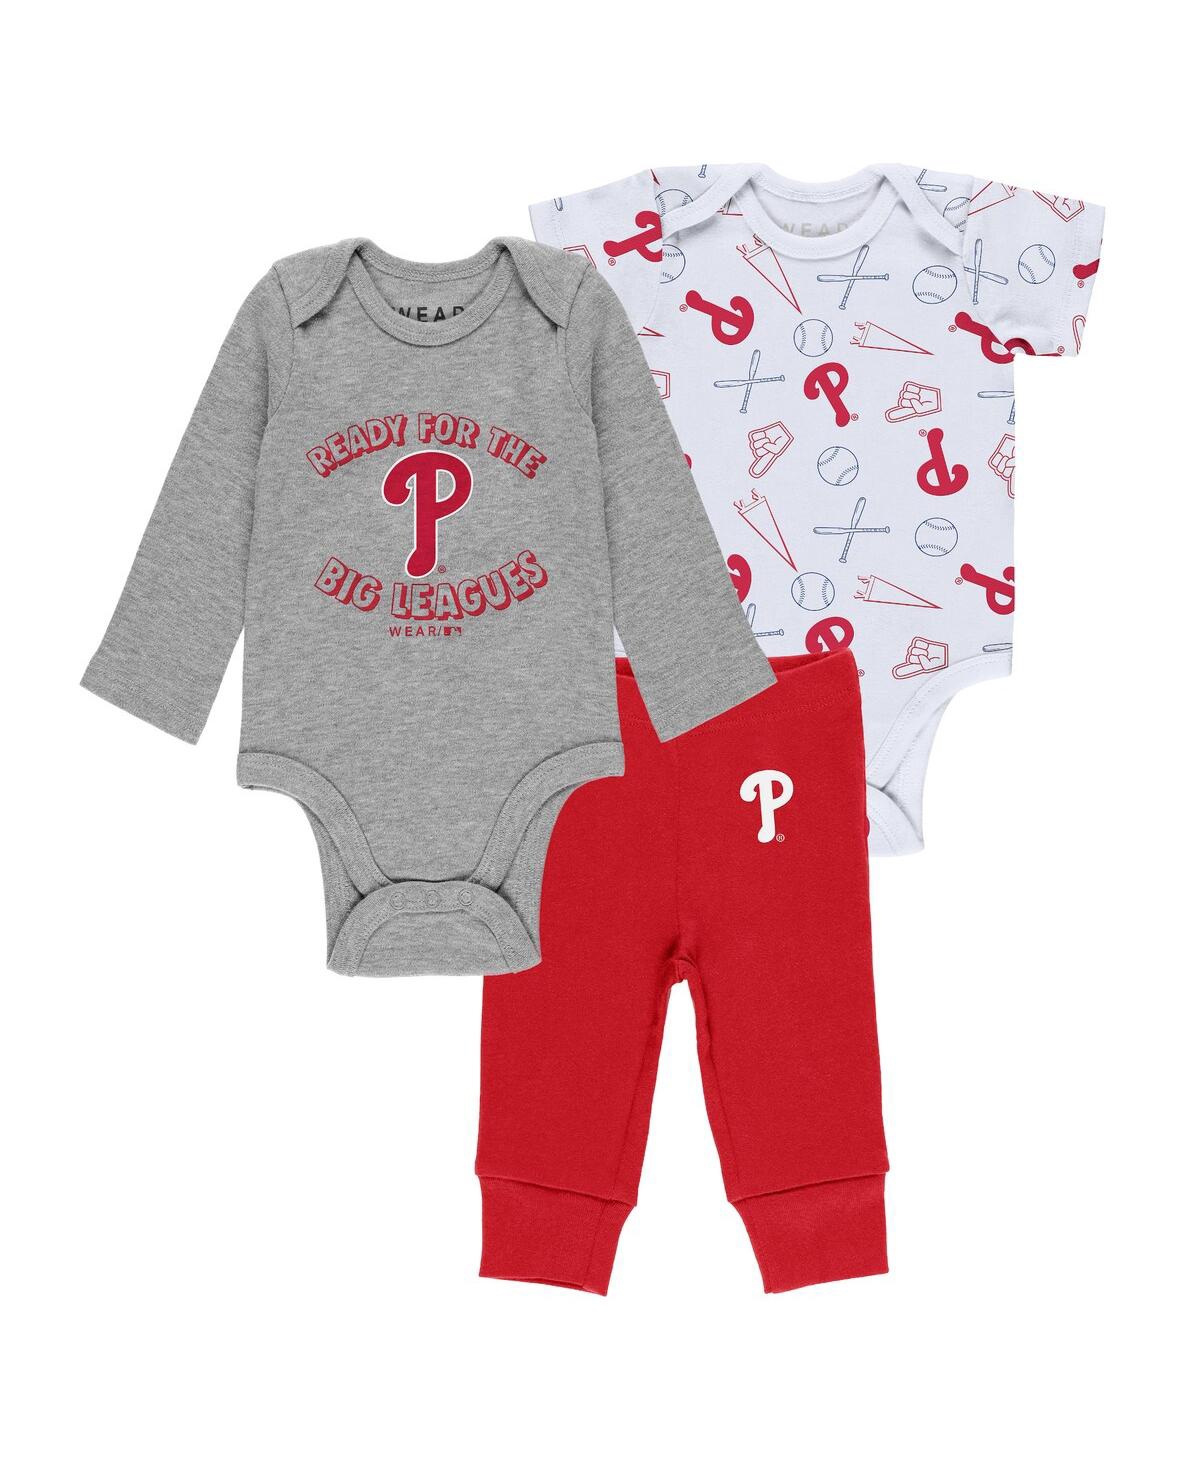 Wear By Erin Andrews Babies' Newborn And Infant Boys And Girls Gray, White, Red Philadelphia Phillies Three-piece Turn Me Around In Gray,white,red